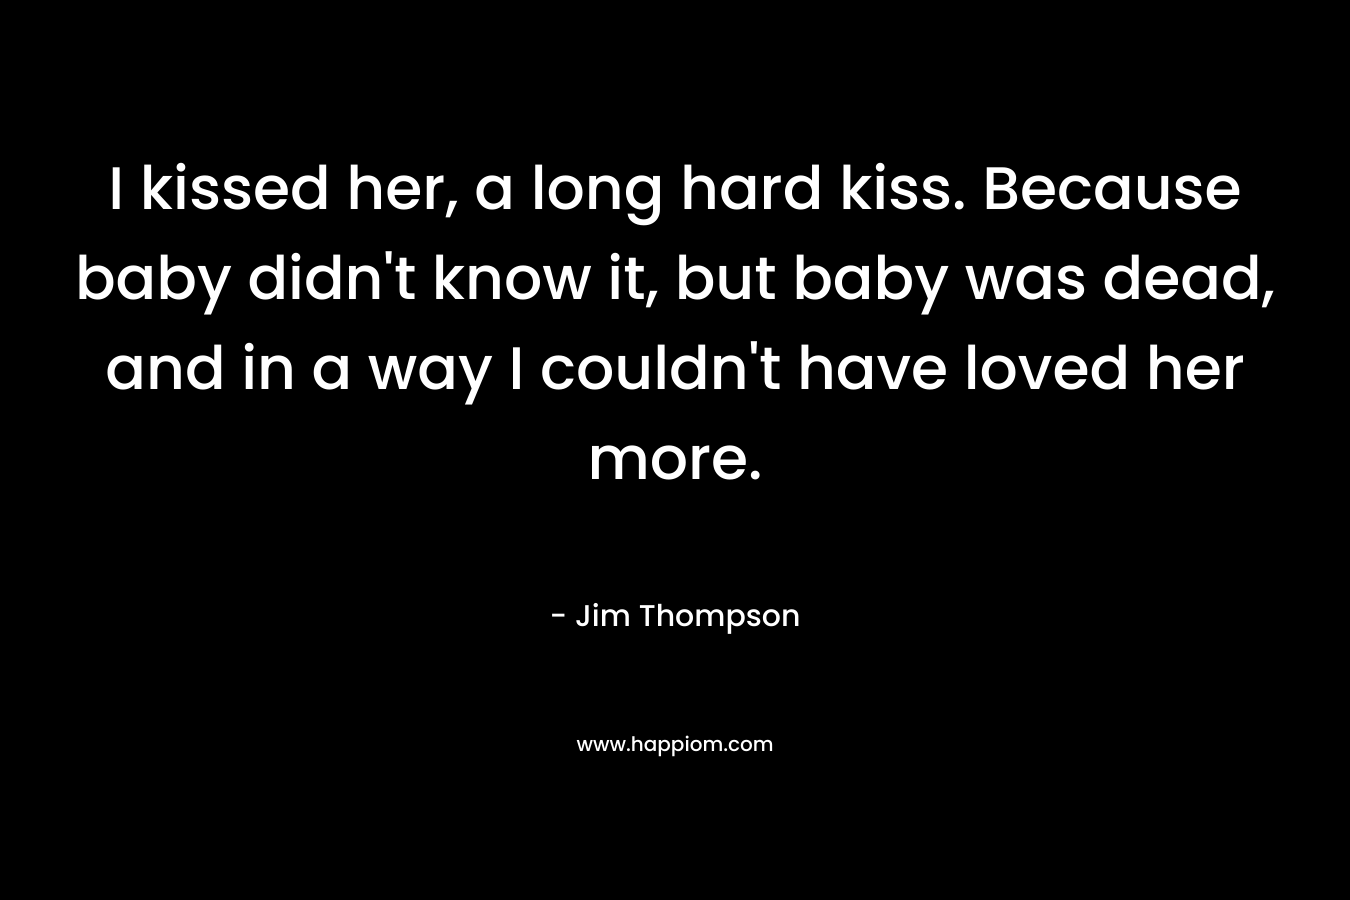 I kissed her, a long hard kiss. Because baby didn't know it, but baby was dead, and in a way I couldn't have loved her more.